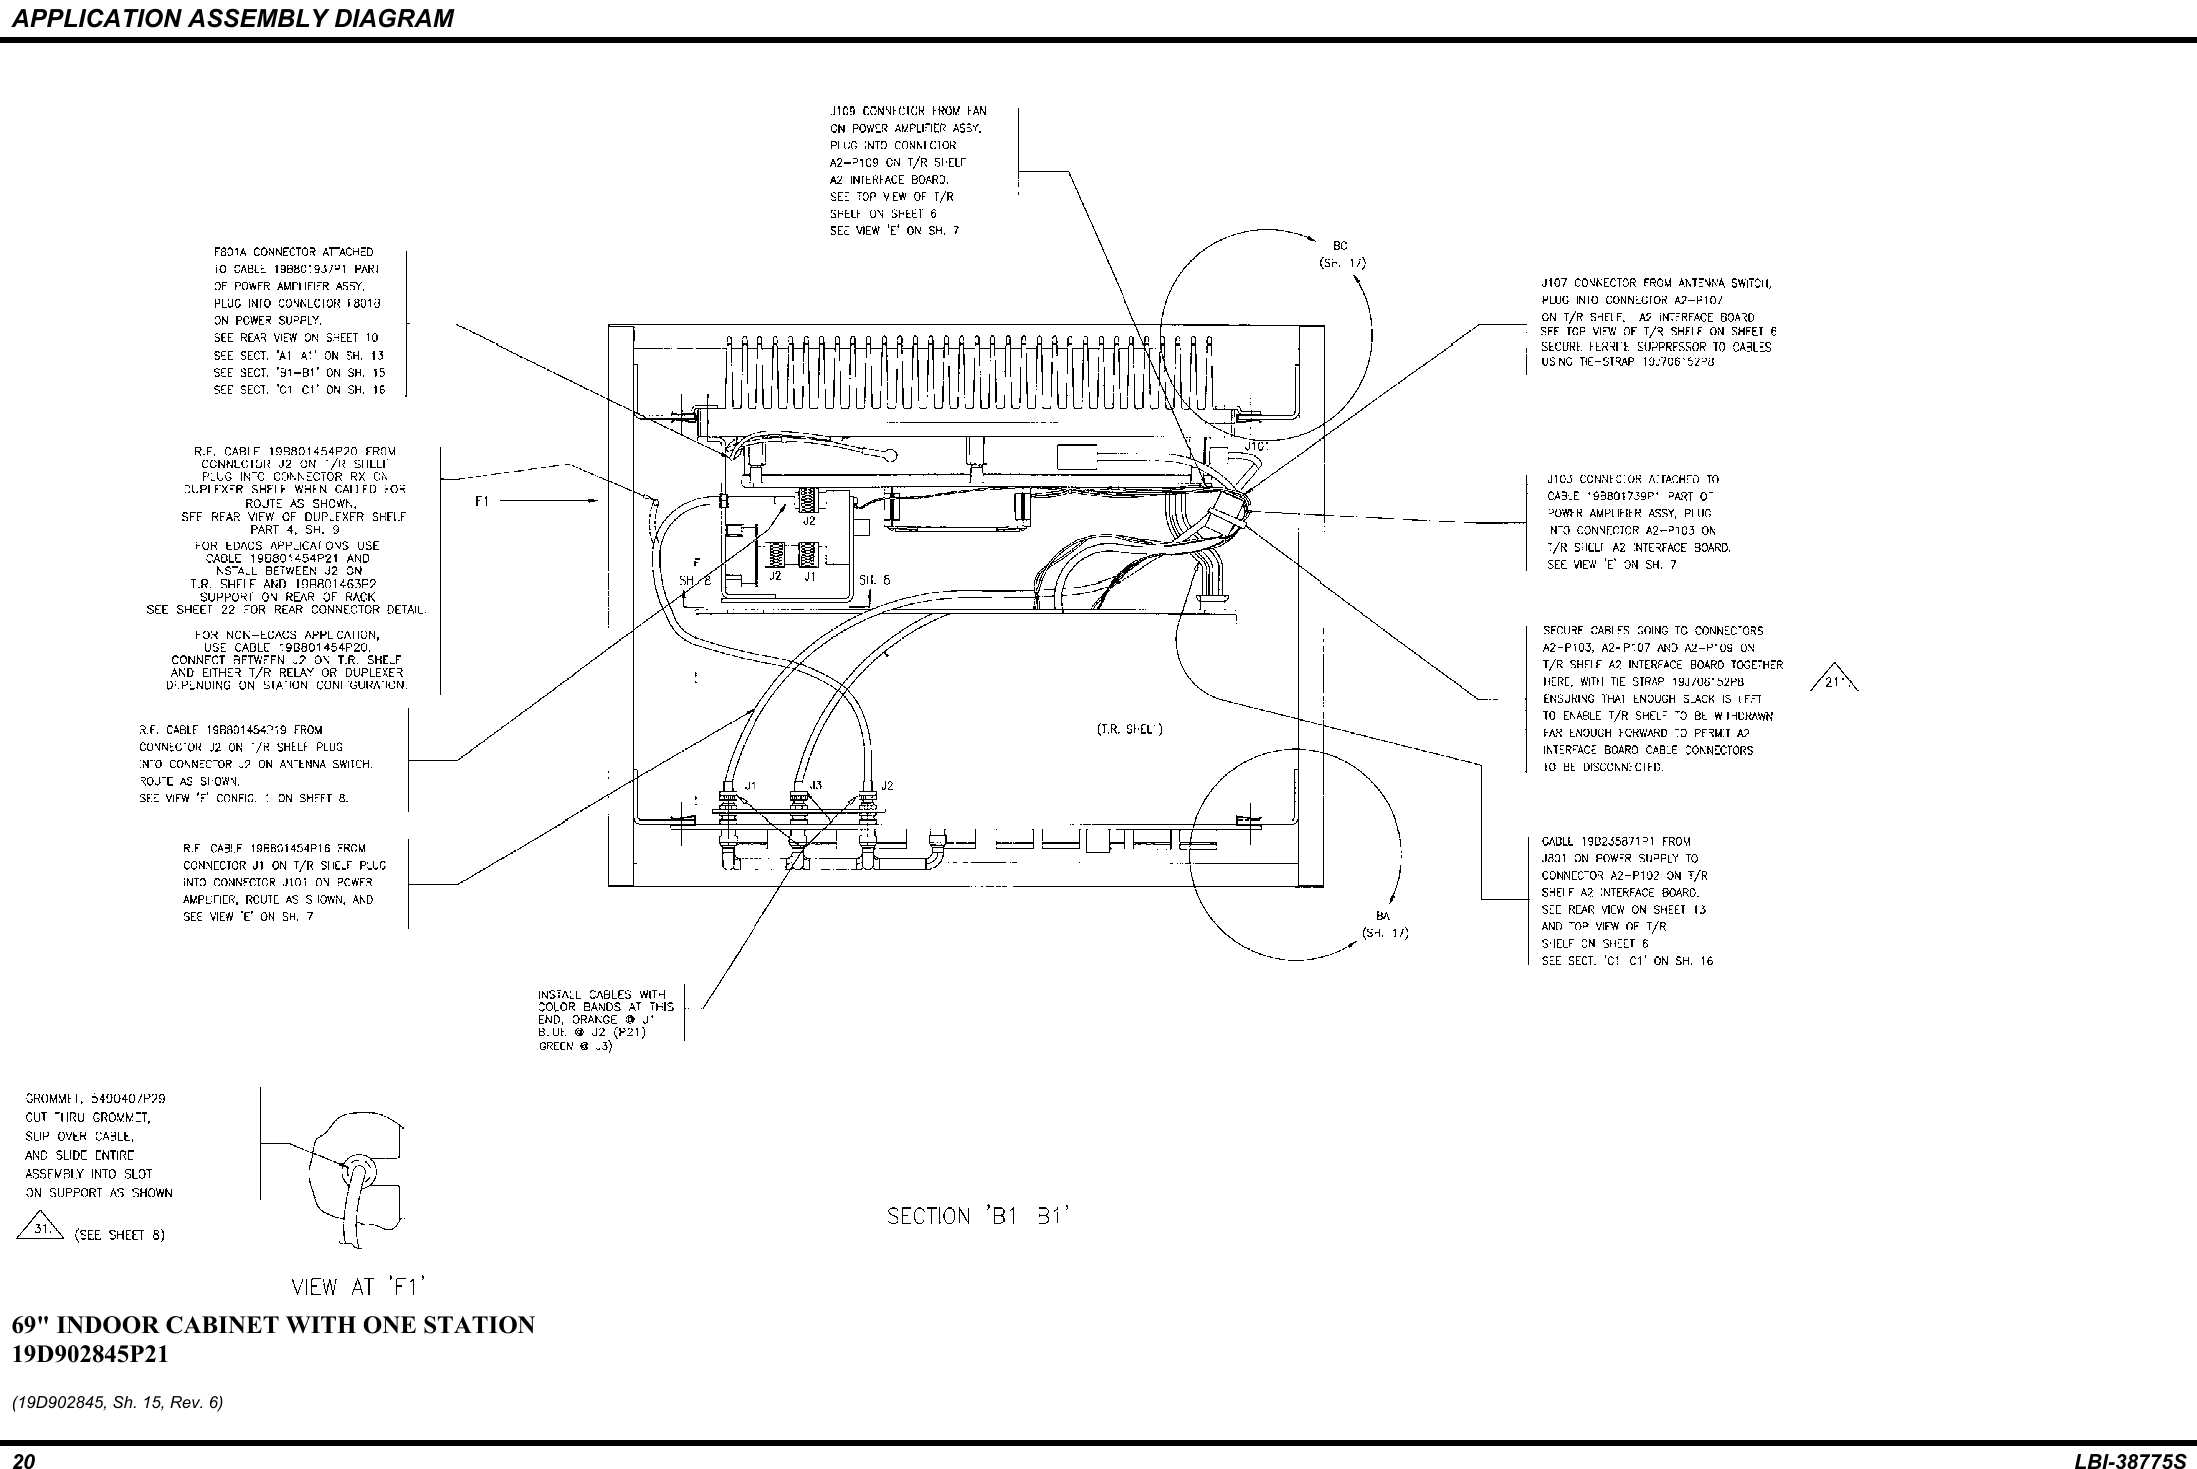 APPLICATION ASSEMBLY DIAGRAM20 LBI-38775S69&quot; INDOOR CABINET WITH ONE STATION19D902845P21(19D902845, Sh. 15, Rev. 6)